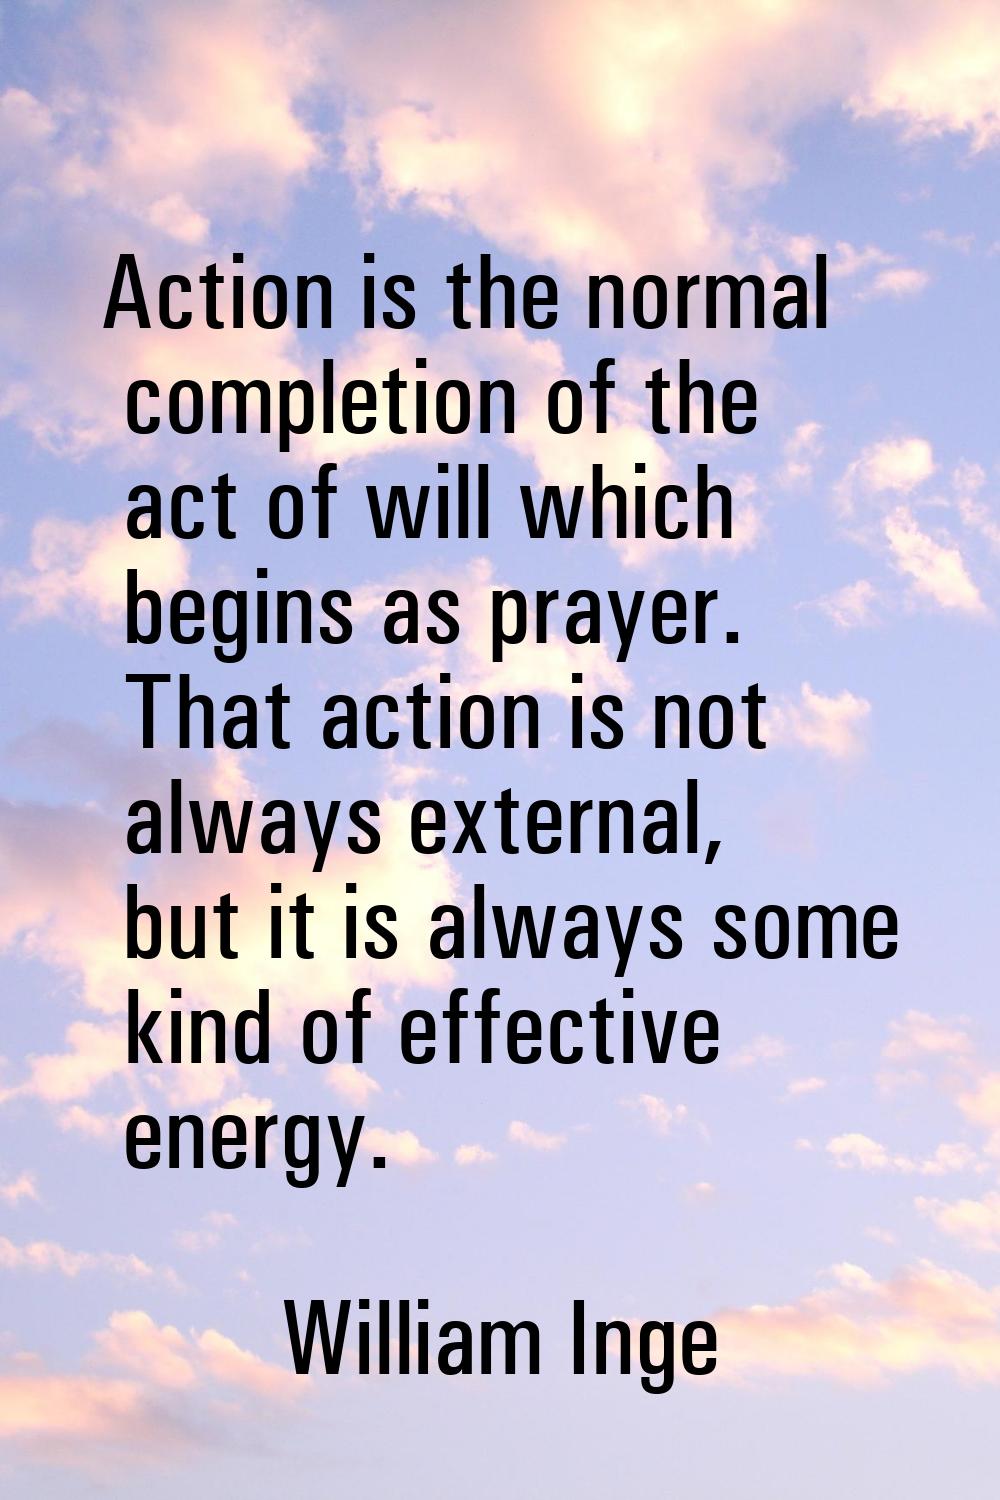 Action is the normal completion of the act of will which begins as prayer. That action is not alway